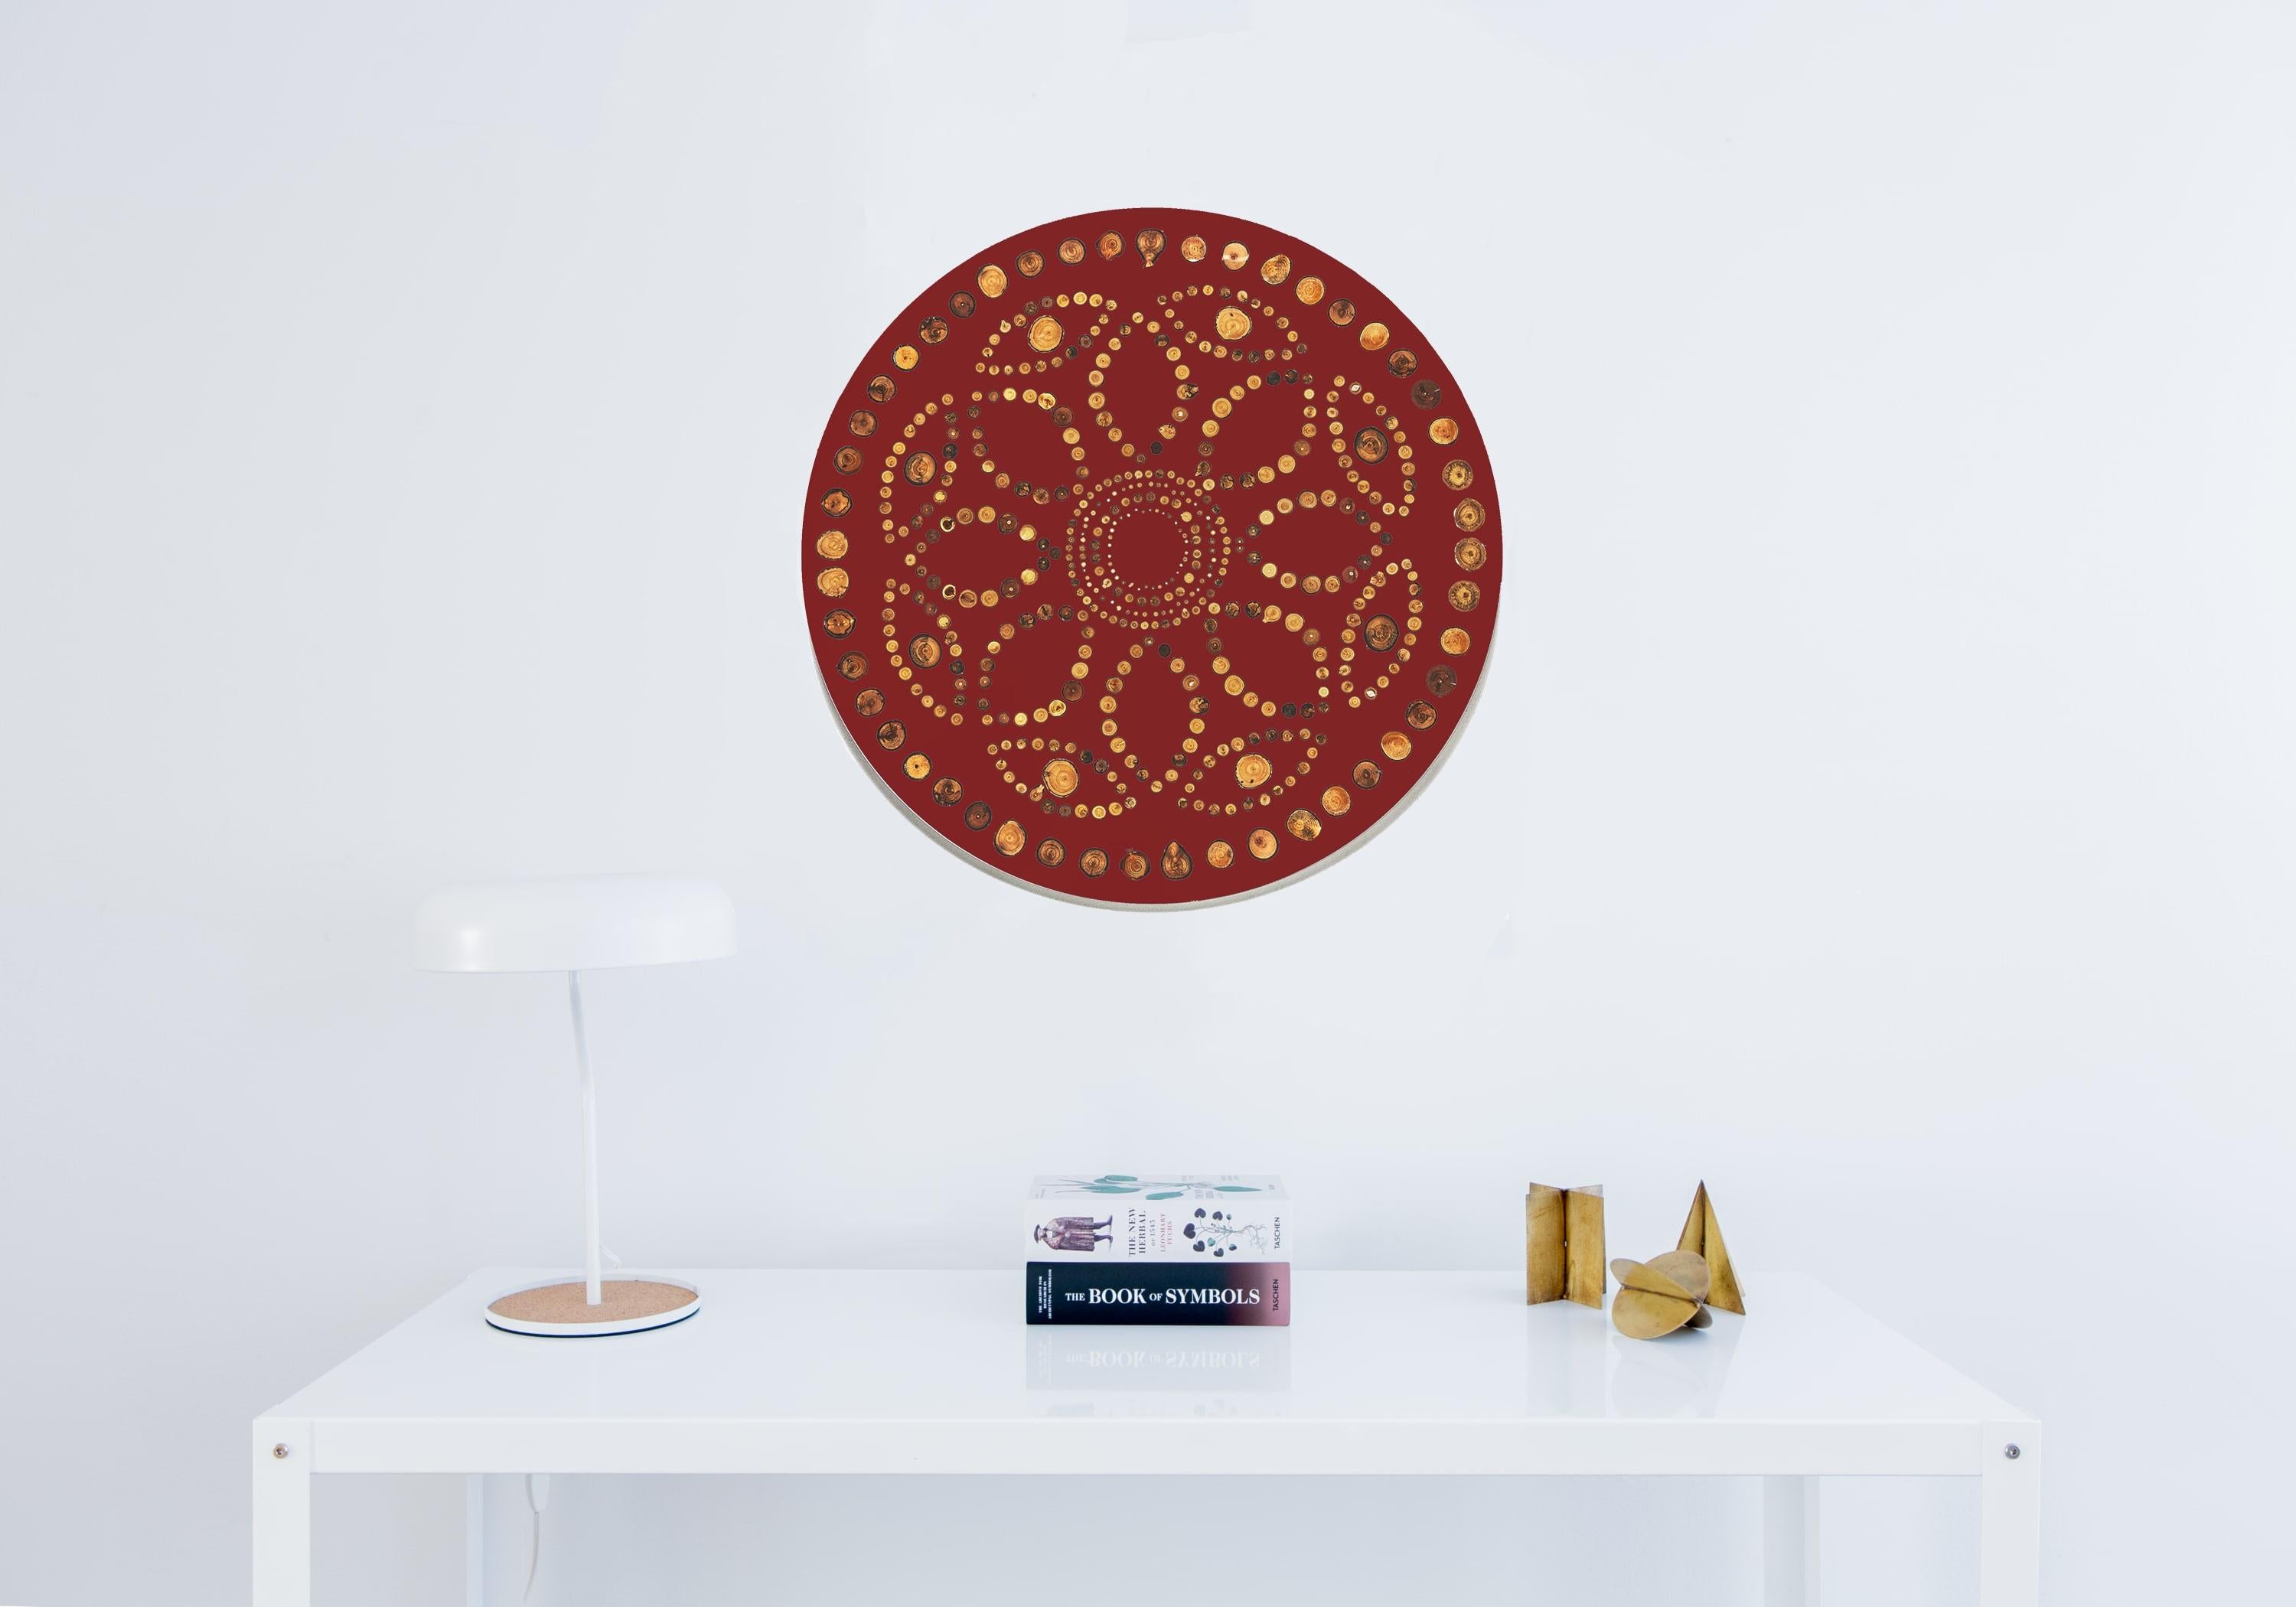 Iris Large custom wall hanging features various fruit wood end-grain embedded in ABDB Maroon resin. Complete with pieces necessary to place on wall.

Measures: 27” diameter.

Handmade by Djivan Schapira. Lead time: 6-8 weeks. Ships from New